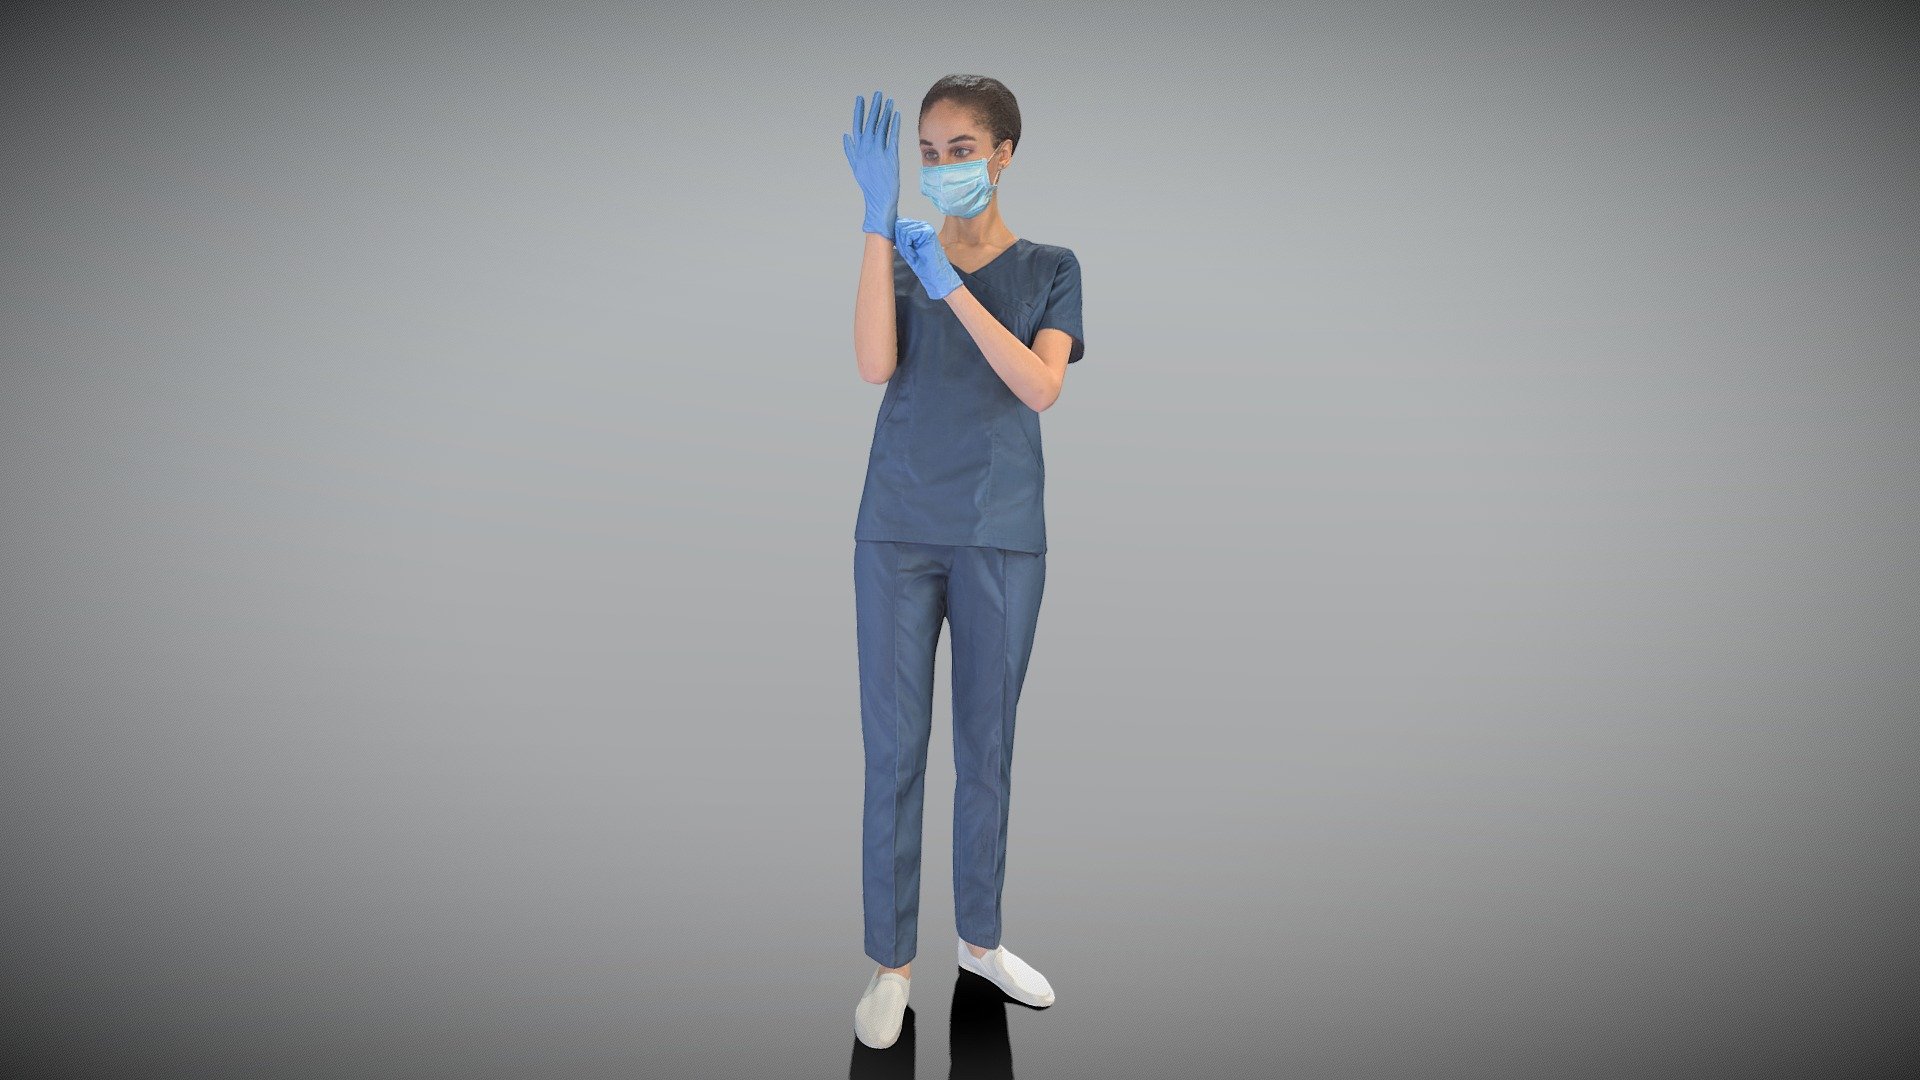 This is a true human size and detailed model of a beautiful young woman of Caucasian appearance dressed in a medical uniform. The model is captured in typical professional pose to perfectly match a variety of architectural and product visualizations, be used as a background or mid-sized character in advert banners, professional products/devices presentations, educational tutorials, VR/AR content, etc.

Technical specifications:




digital double 3d scan model

150k &amp; 30k triangles | double triangulated

high-poly model (.ztl tool with 4-5 subdivisions) clean and retopologized automatically via ZRemesher

sufficiently clean

PBR textures 8K resolution: Diffuse, Normal, Specular maps

non-overlapping UV map

no extra plugins are required for this model

Download package includes a Cinema 4D project file with Redshift shader, OBJ, FBX, STL files, which are applicable for 3ds Max, Maya, Unreal Engine, Unity, Blender, etc.

3D EVERYTHING

Stand with Ukraine! - Attractive nurse putting on gloves 359 - Buy Royalty Free 3D model by deep3dstudio 3d model